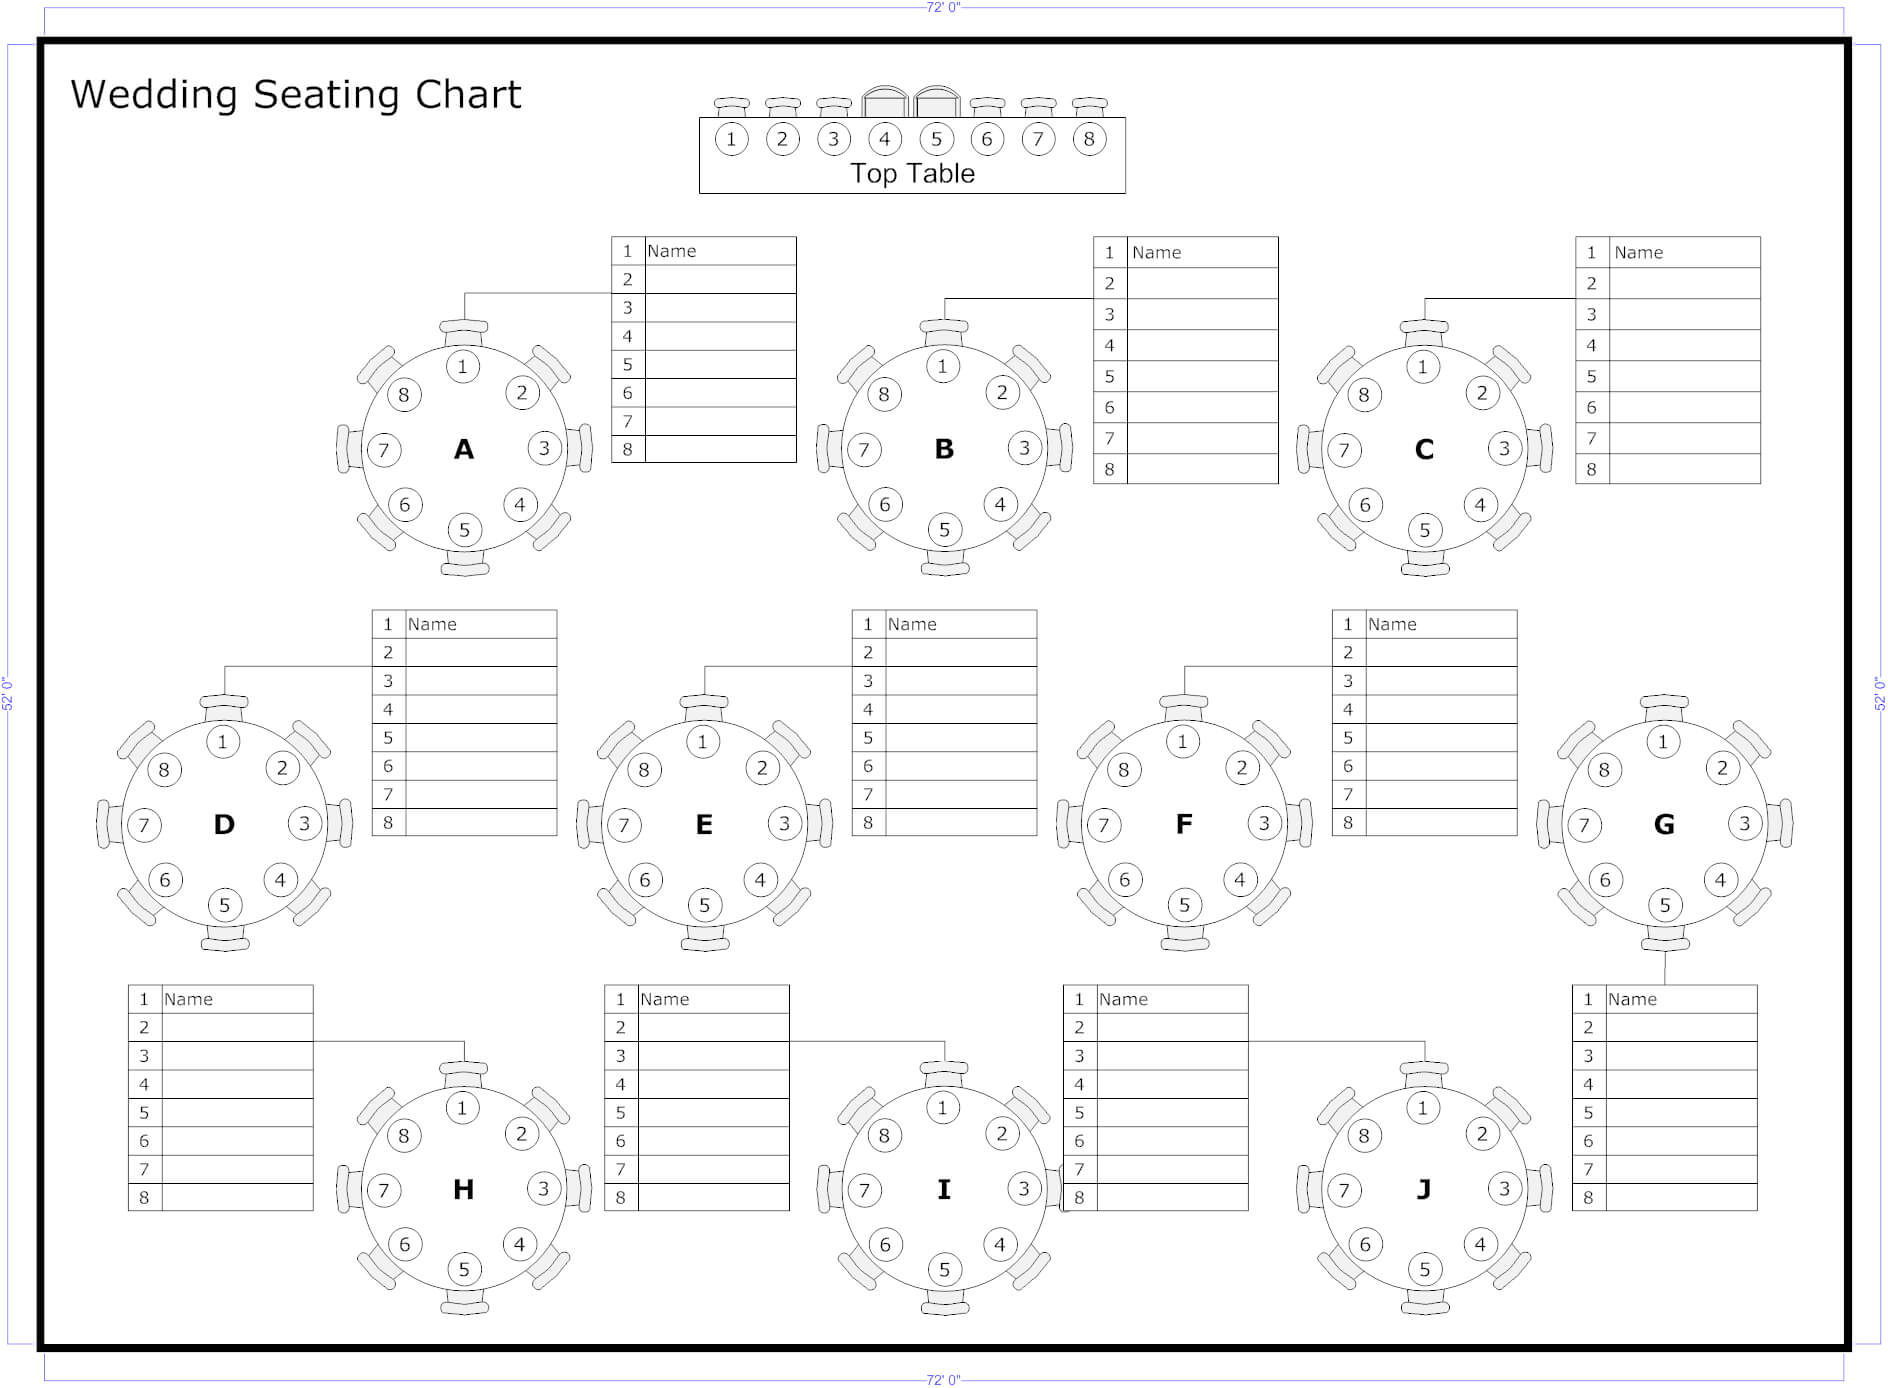 Tips To Seat Your Wedding Guests | Organized | Seating Chart Throughout Wedding Seating Chart Template Word